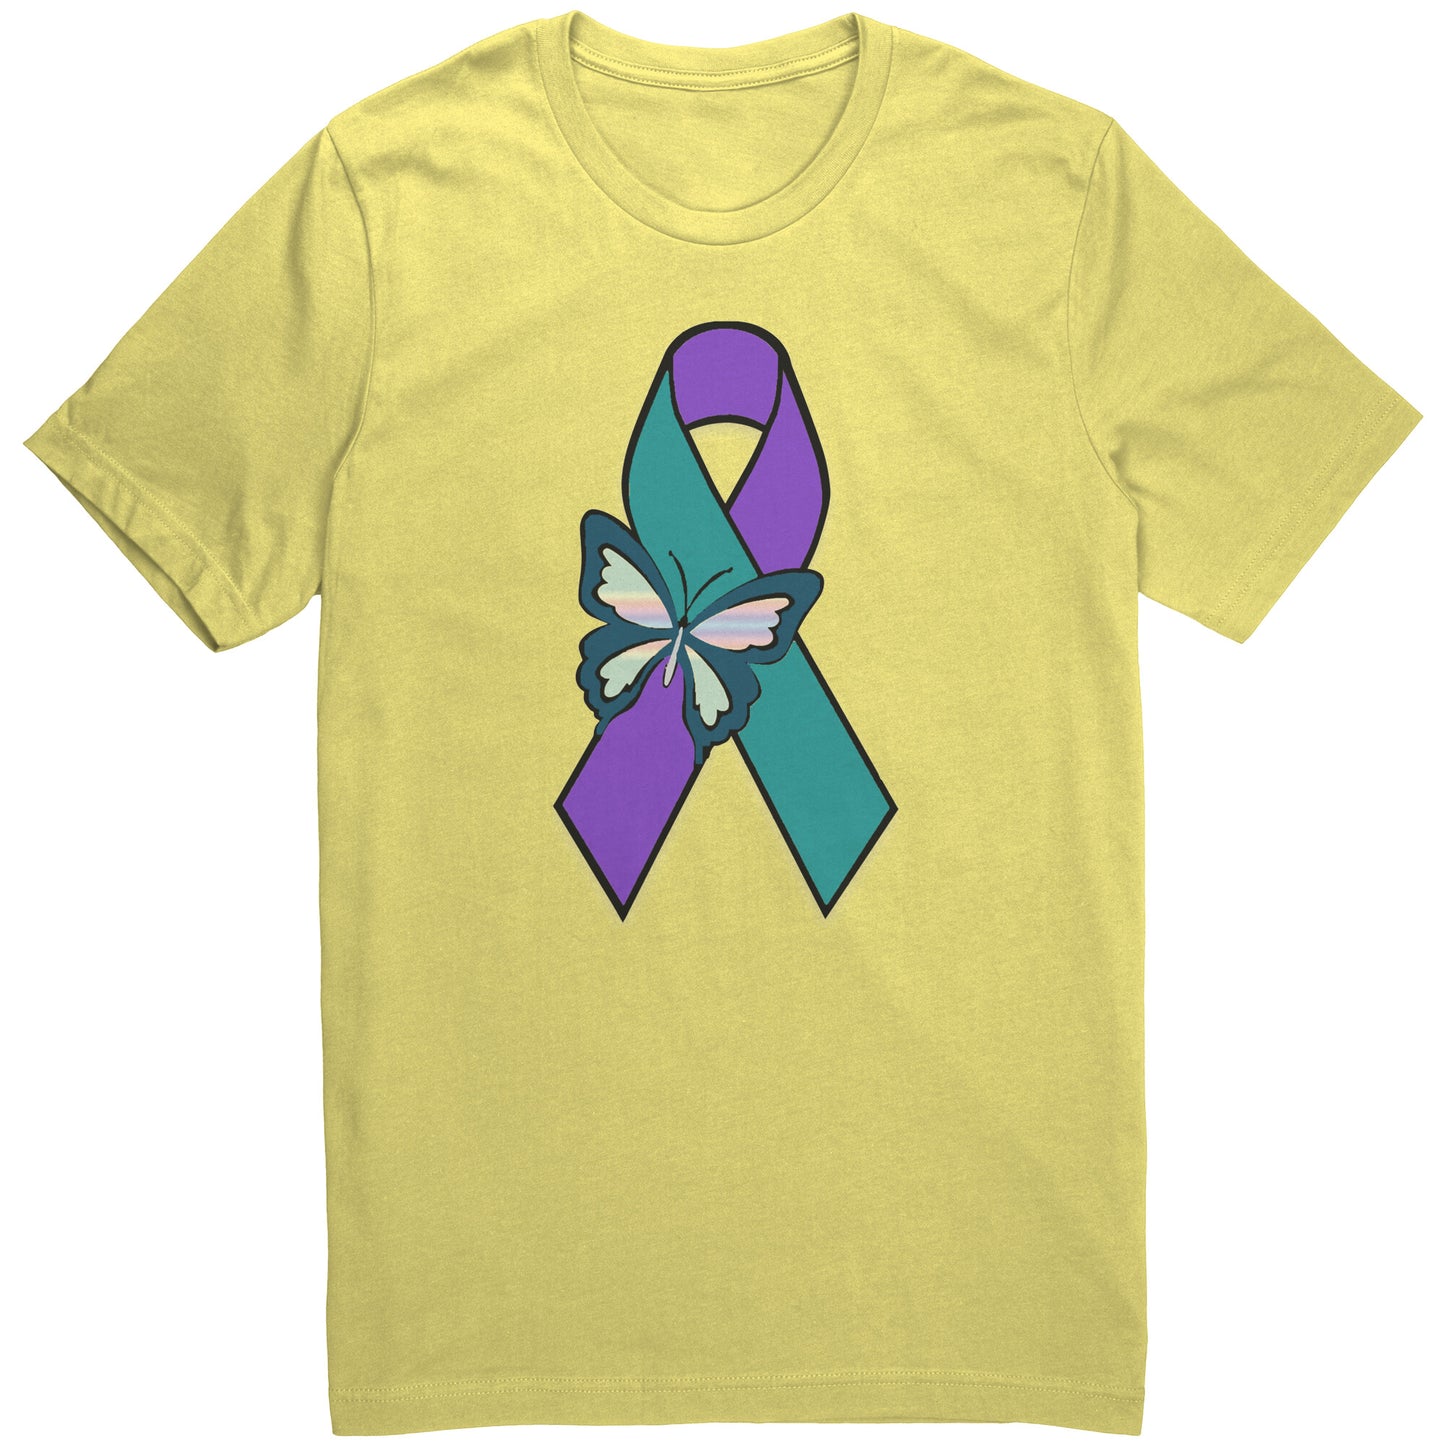 Suicide Awareness Butterfly Ribbon T-Shirt